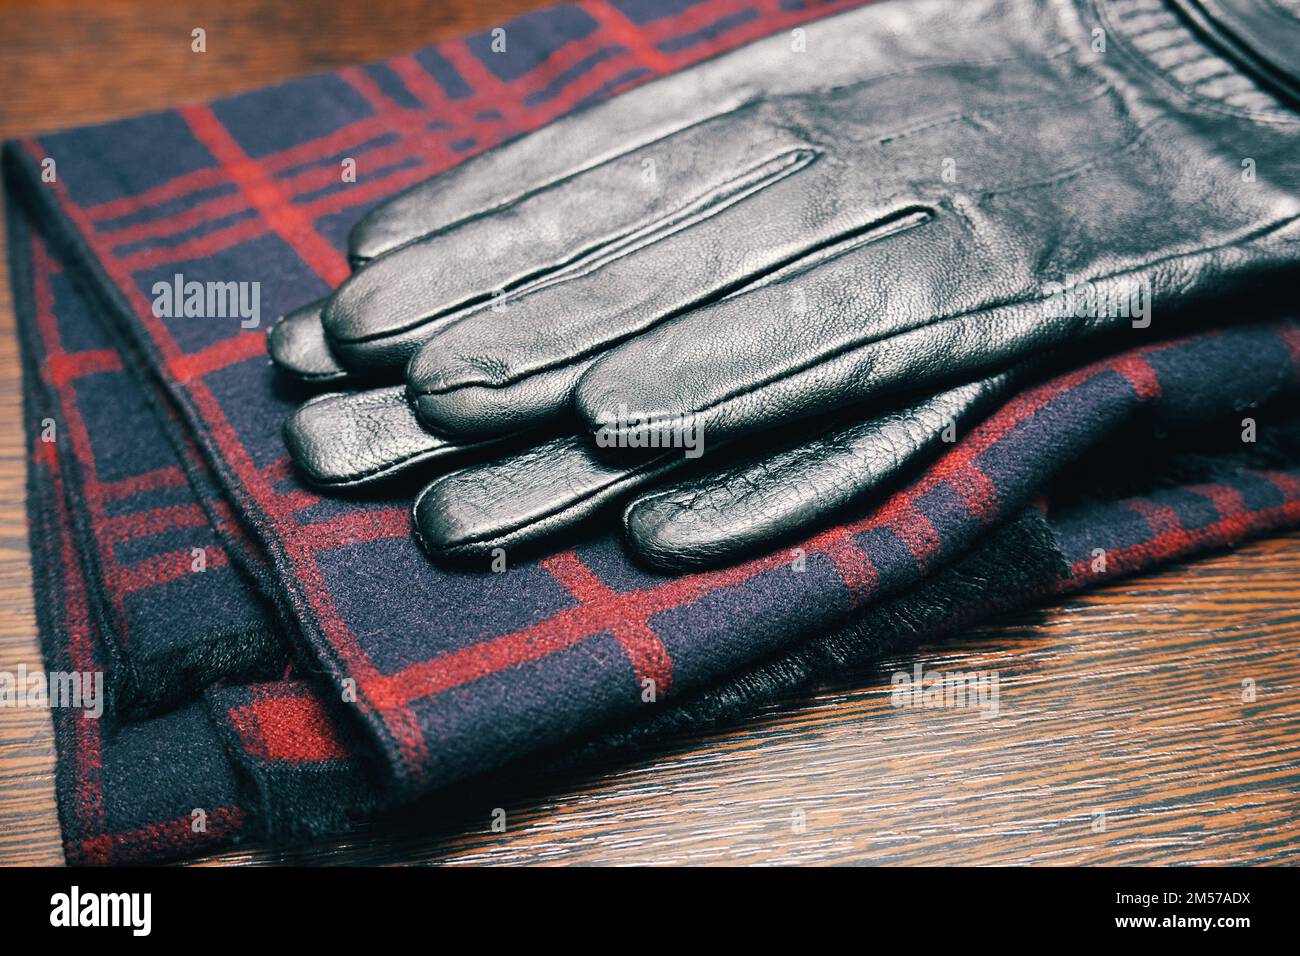 Men's leather gloves and a plaid scarf on a wooden table close-up Stock Photo